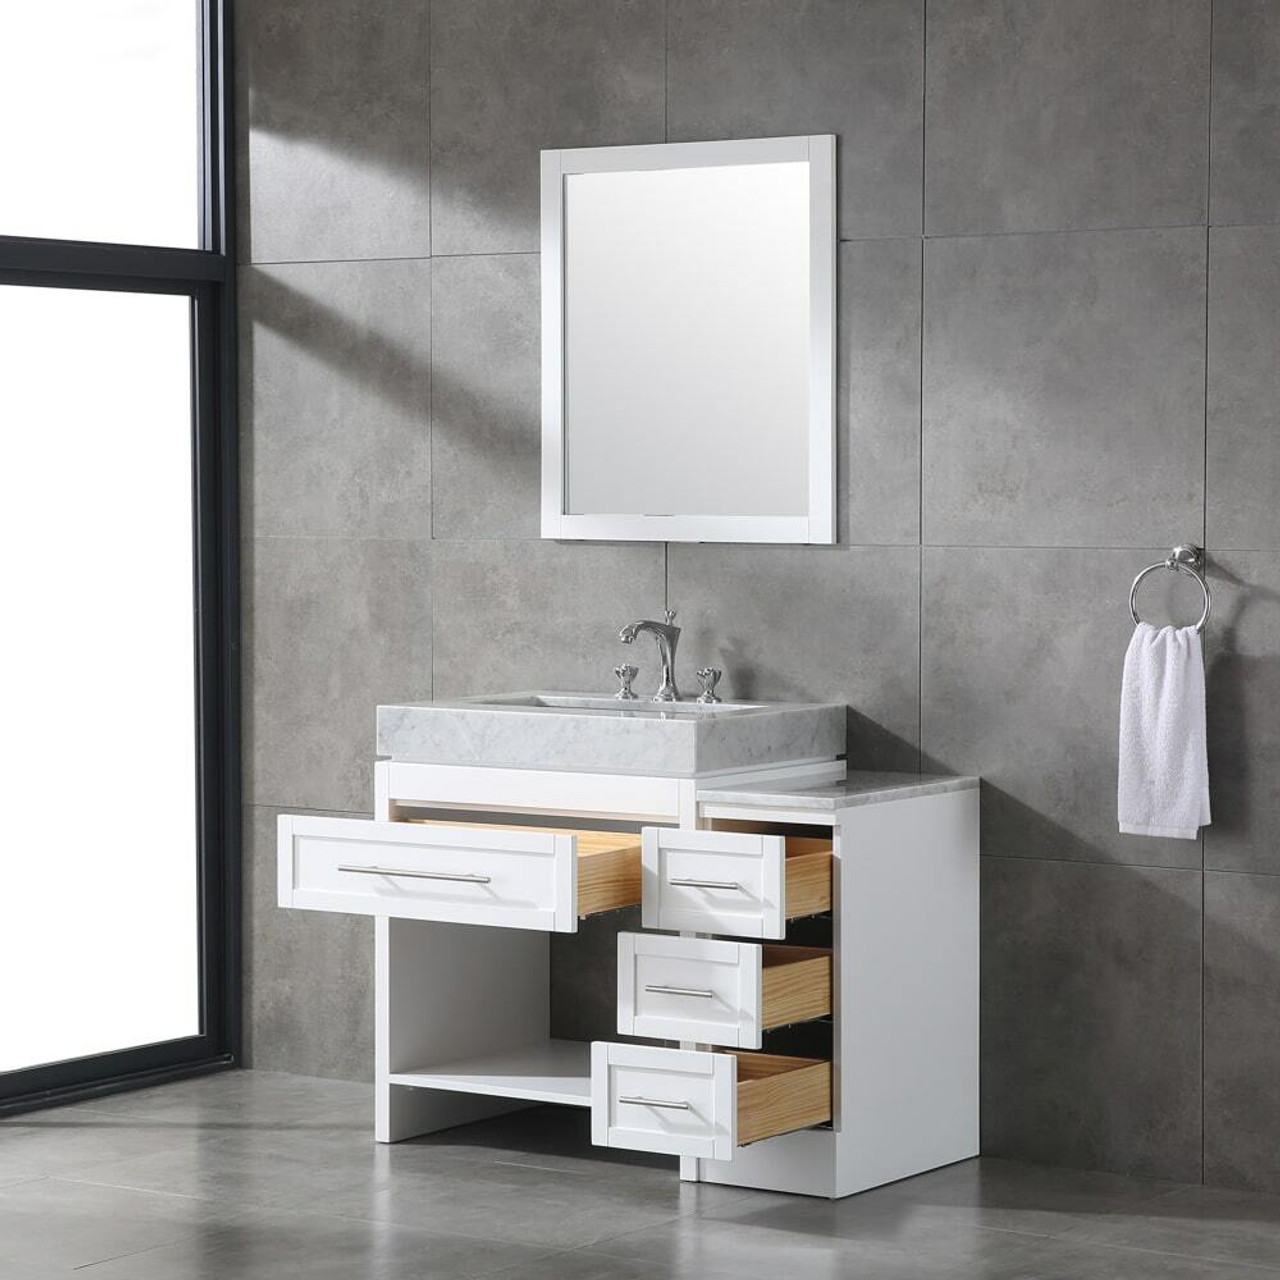 Venetian 12 in Bathroom Drawer Cabinet in White with Carrera White Marble  Countertop